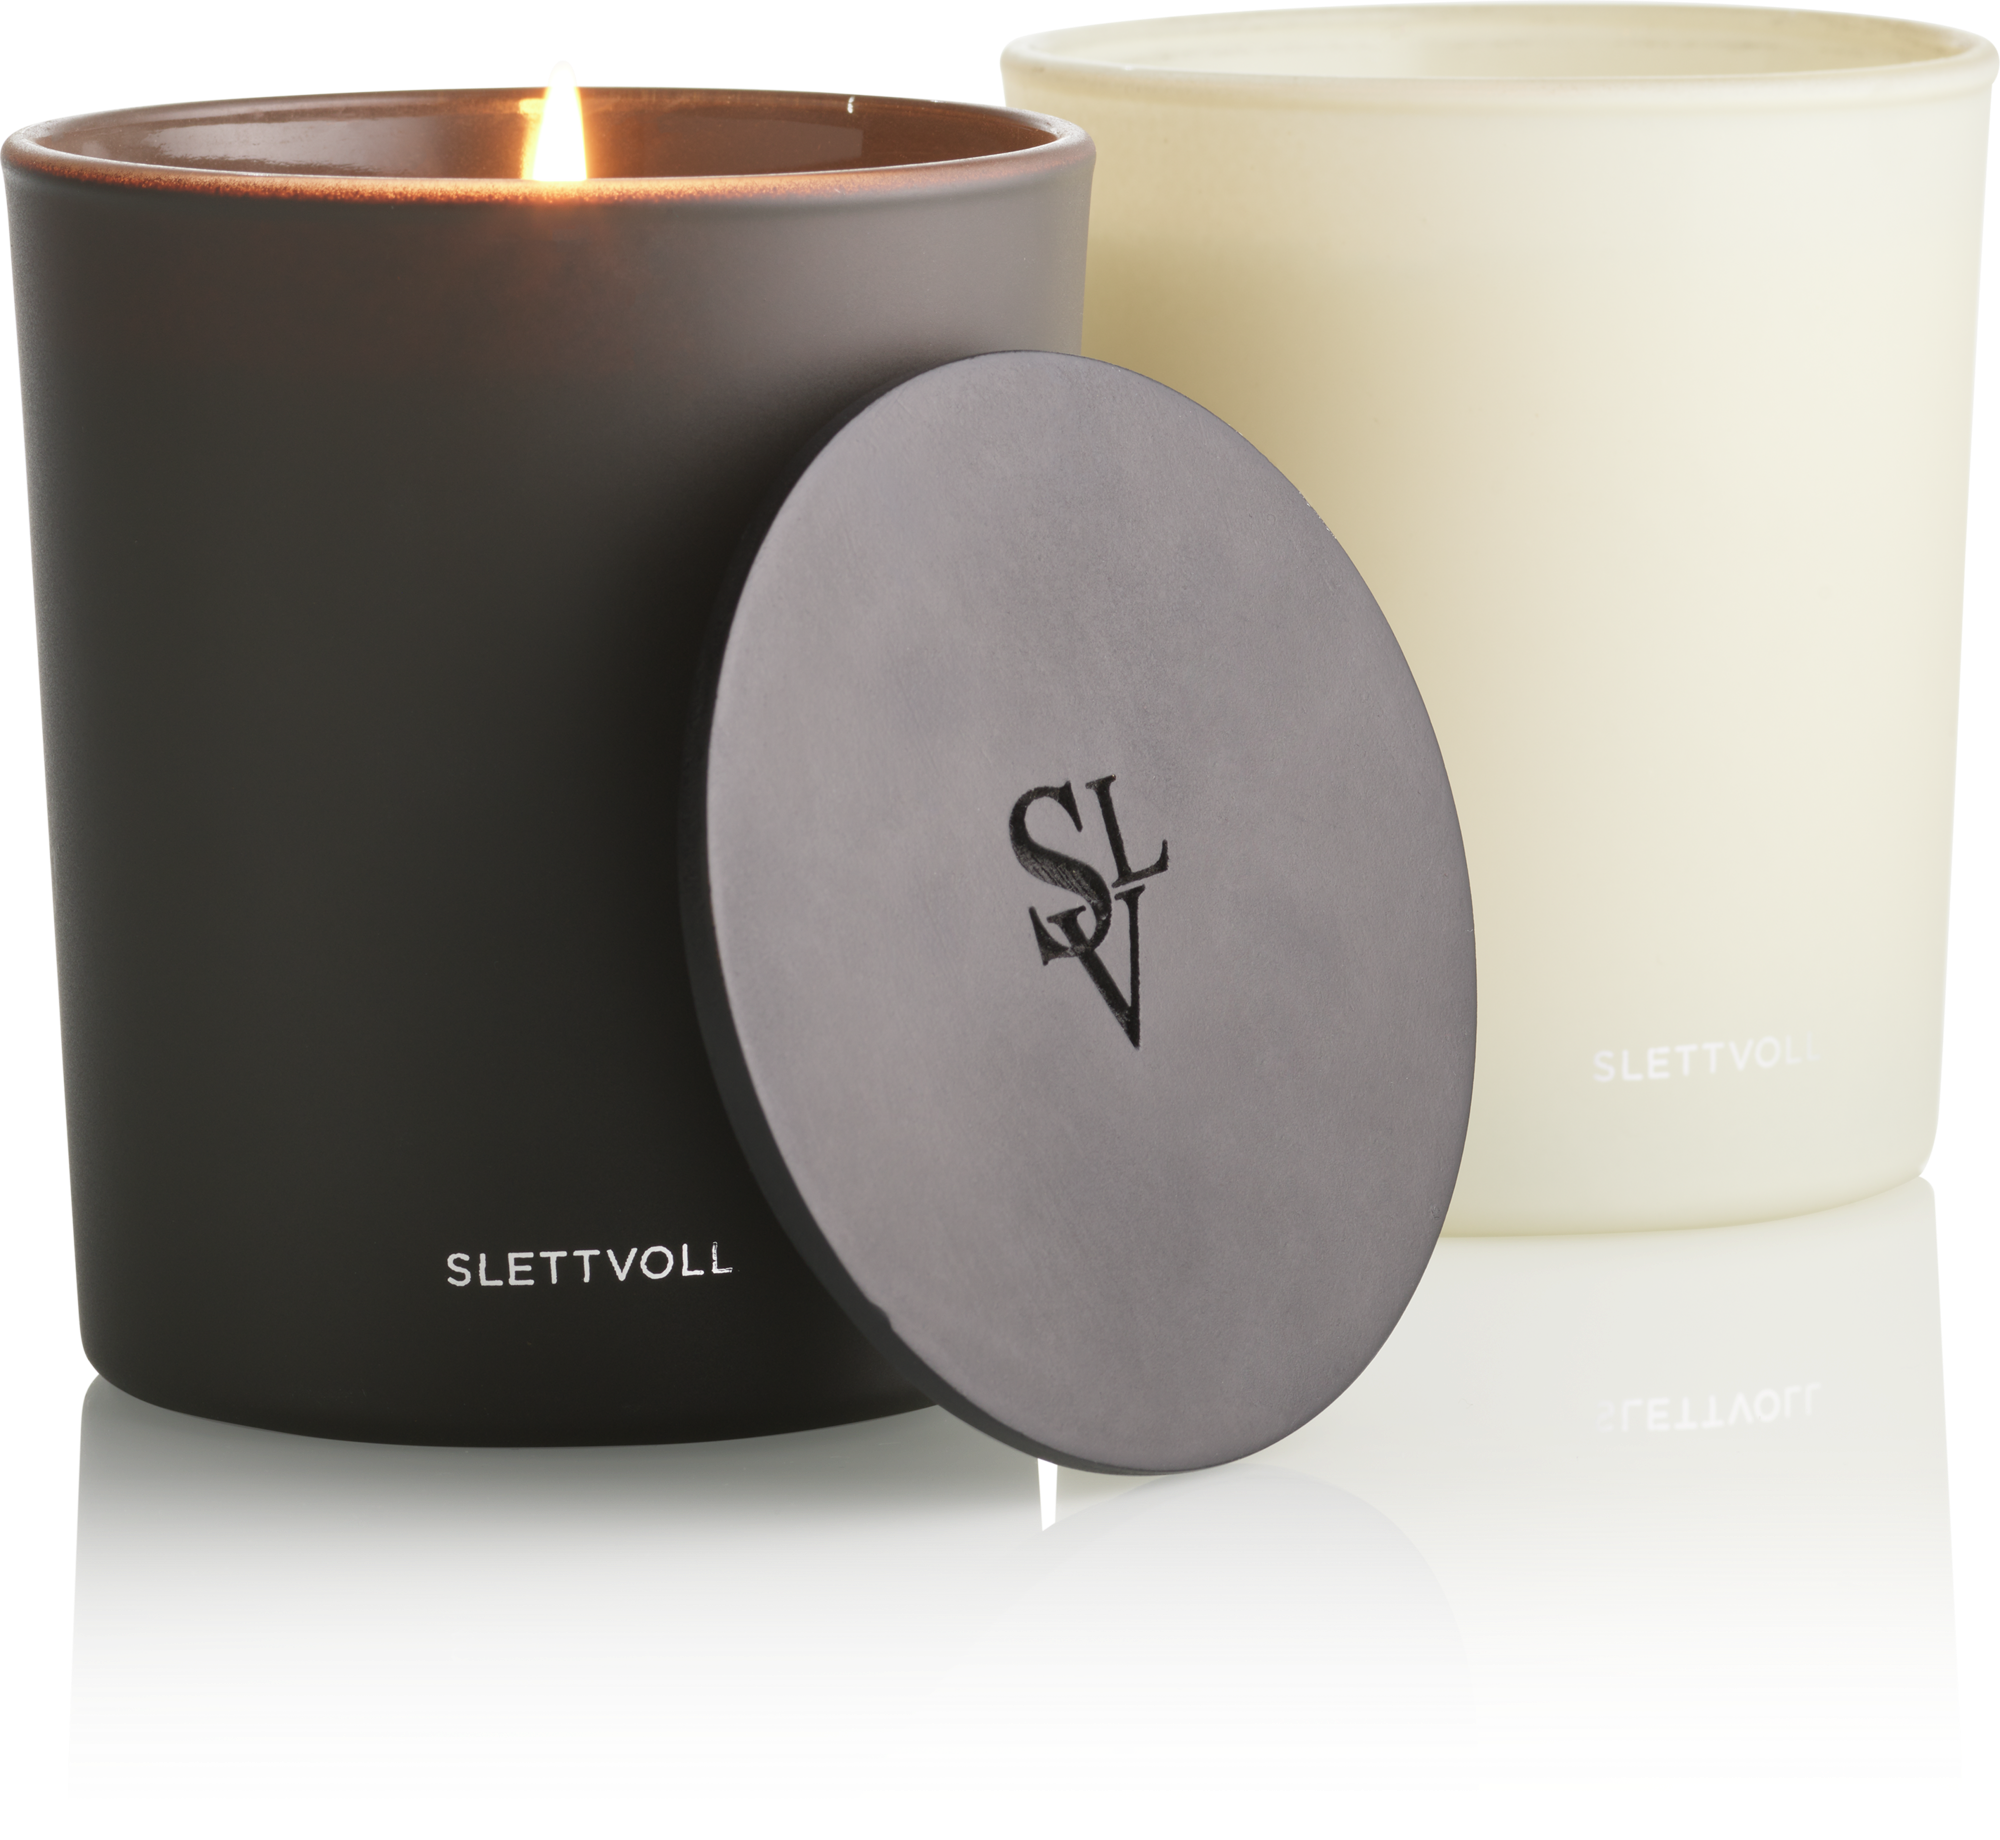 Clean Cotton scented candle